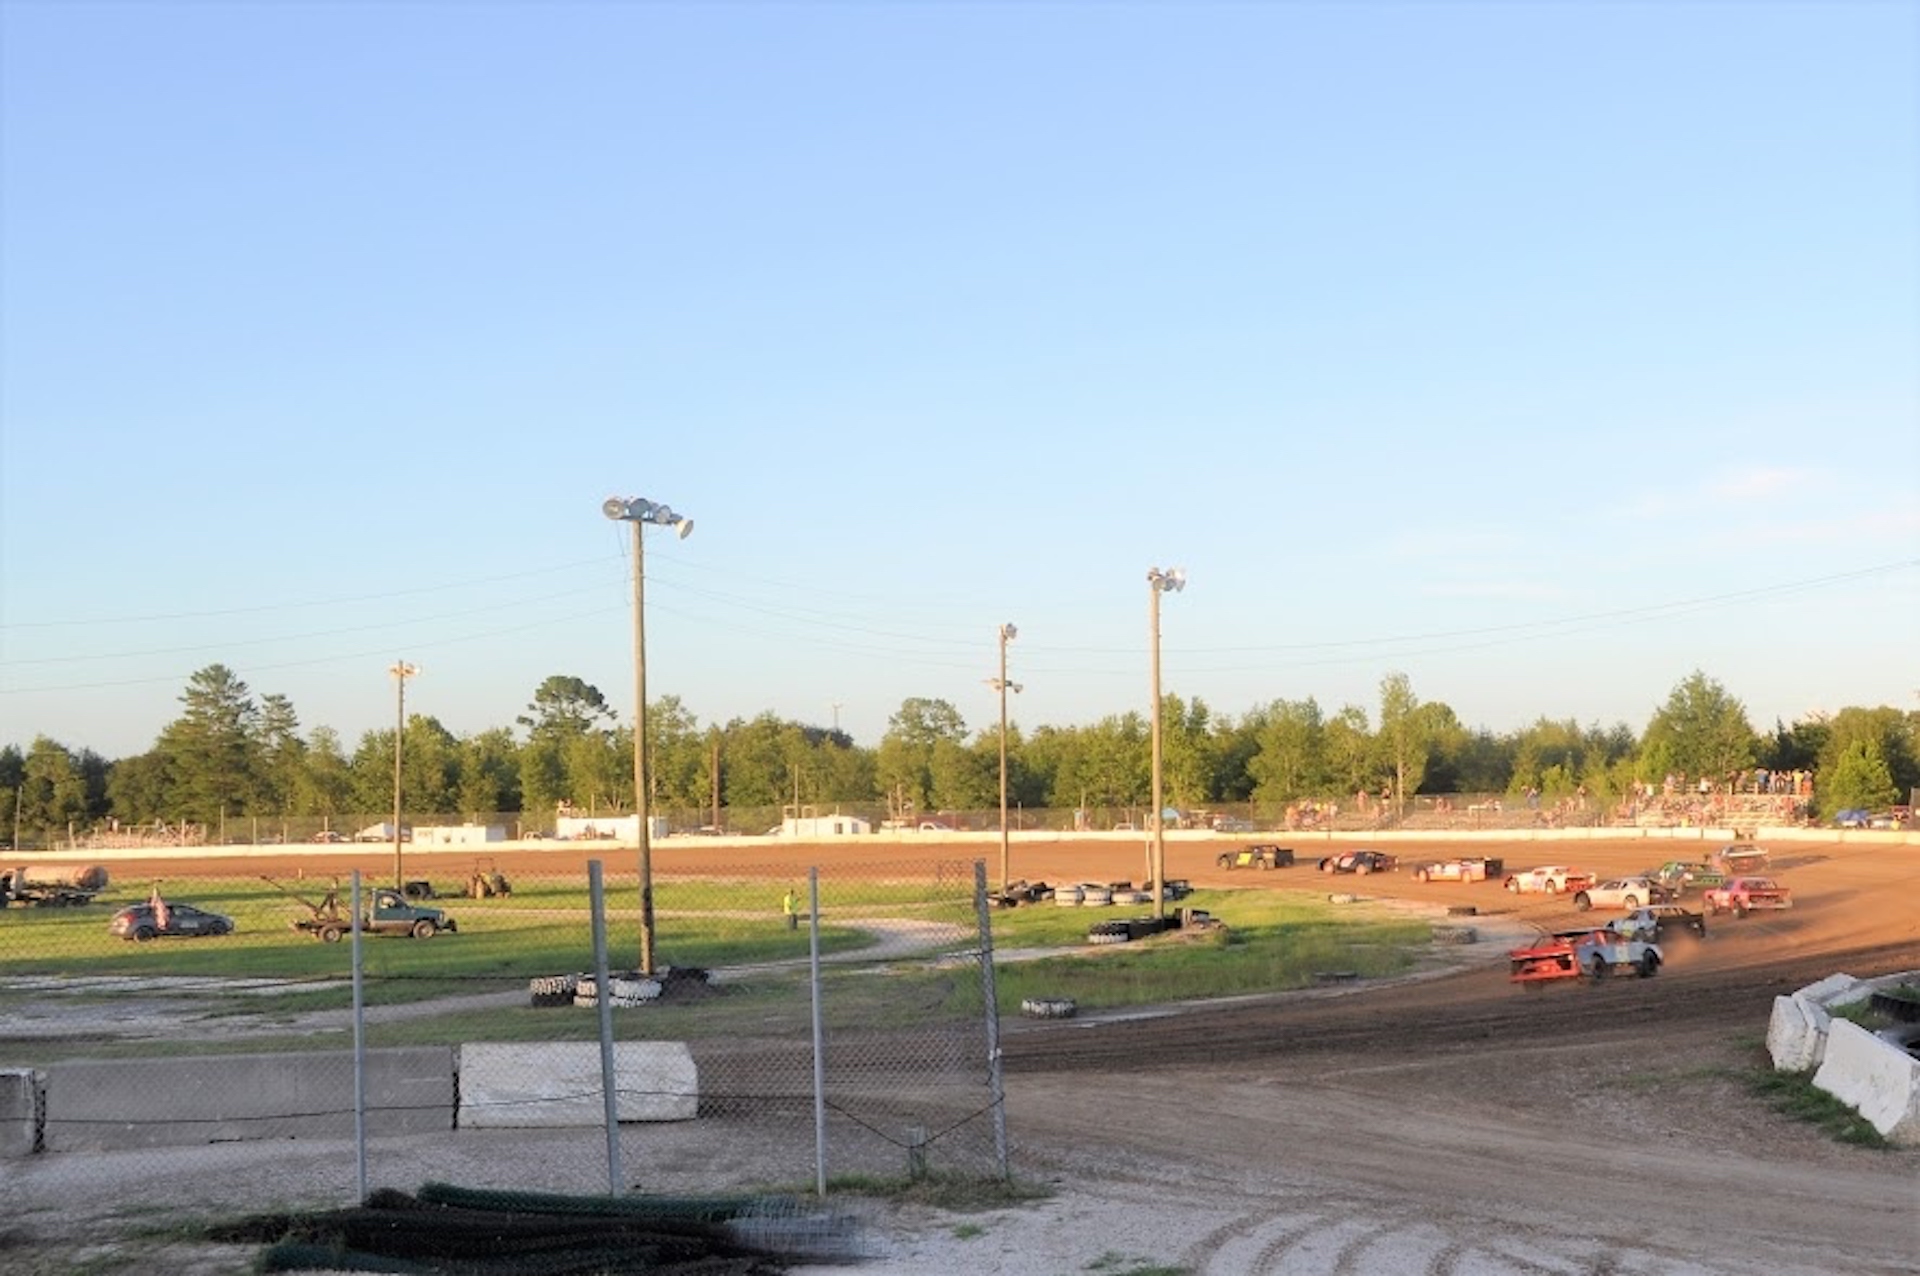 Buy your own oval dirt track for 799,000